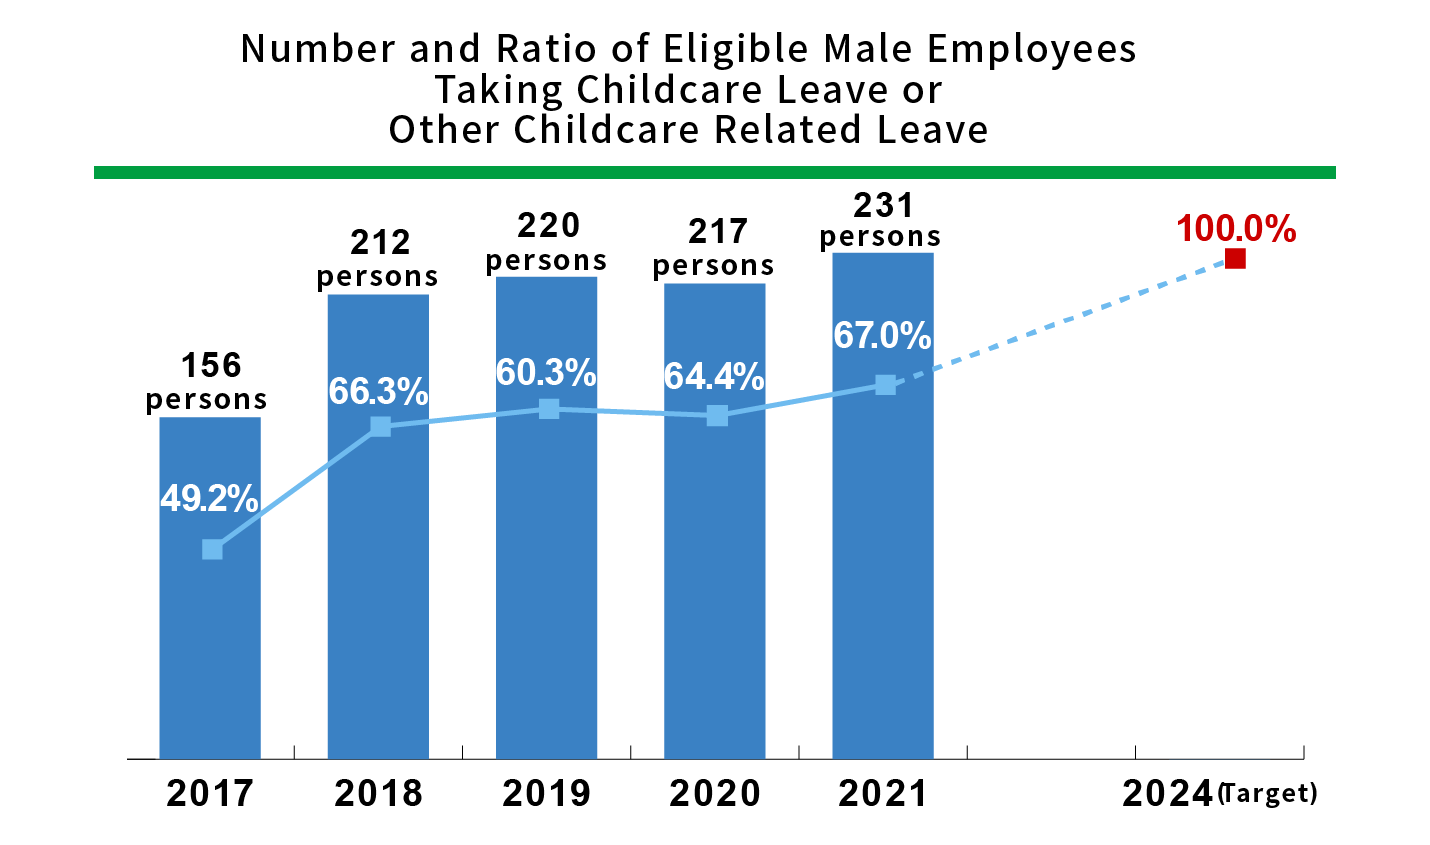 Number and Ratio of Eligible Male Employees Taking Childcare Leave or Other Childcare Related Leave